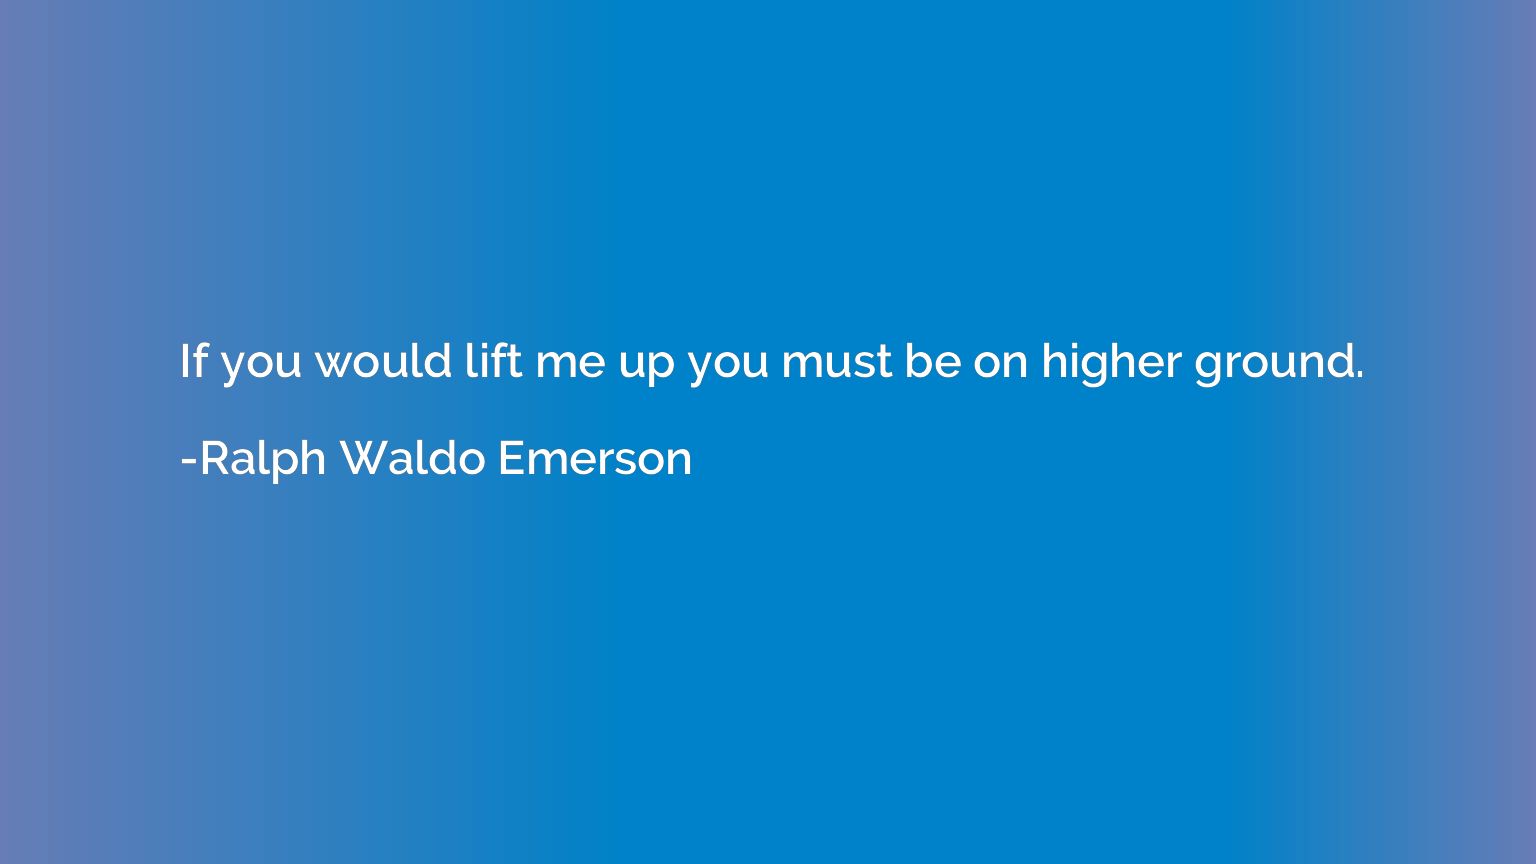 If you would lift me up you must be on higher ground.